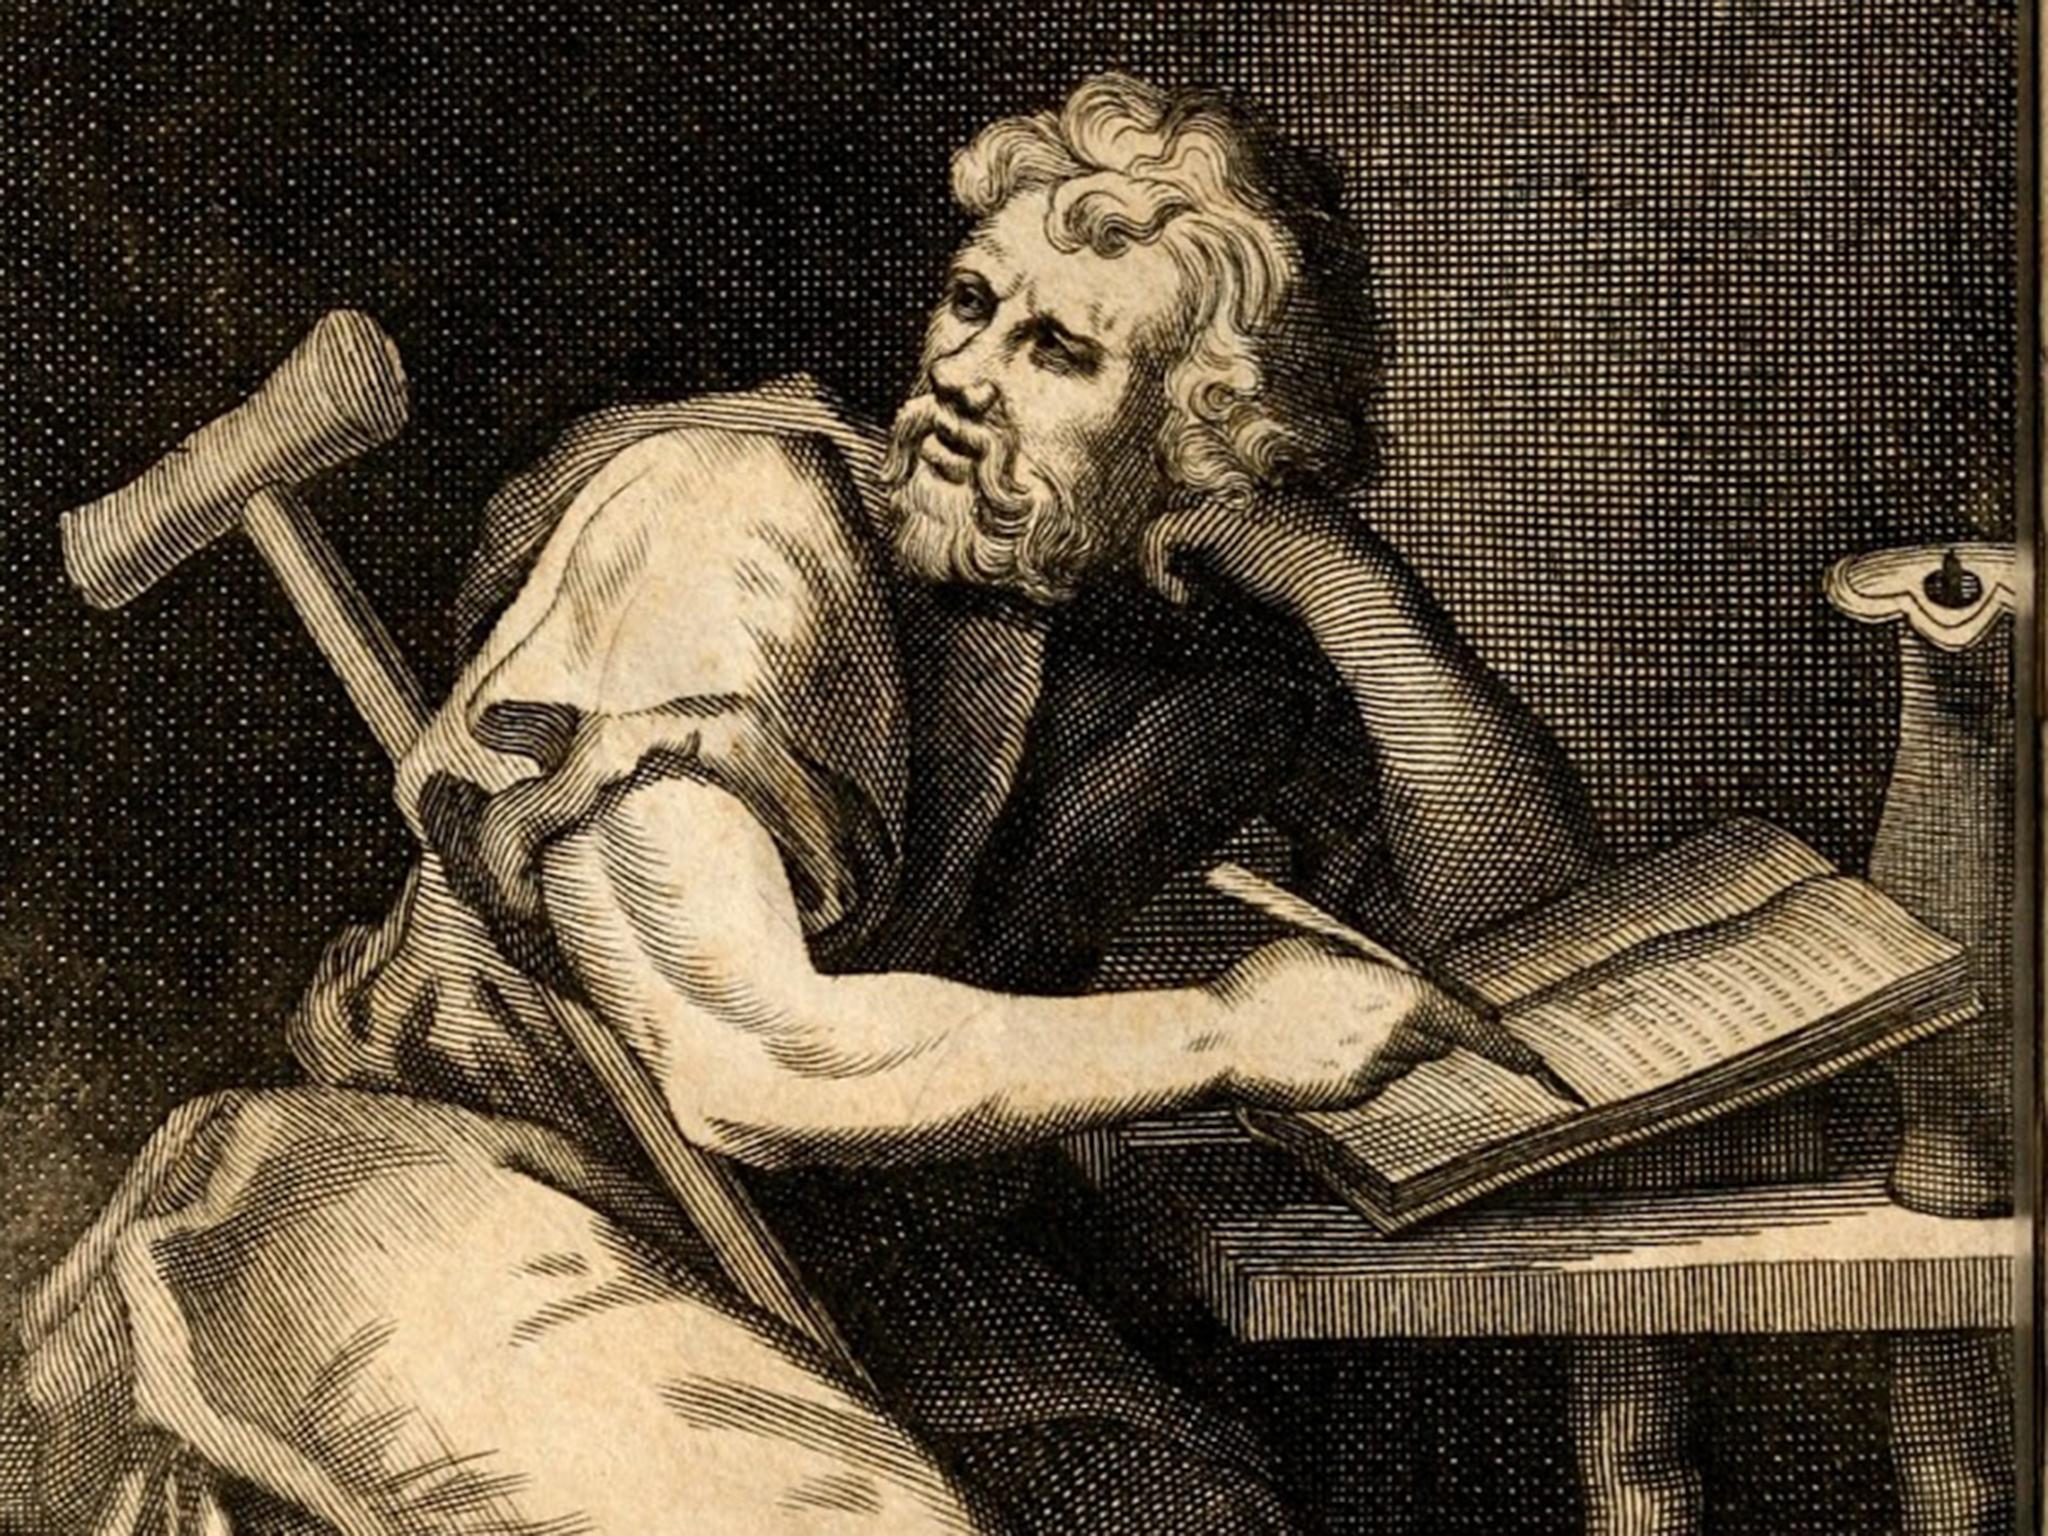 Epictetus urges us to see no distinction between 'is' and 'ought'